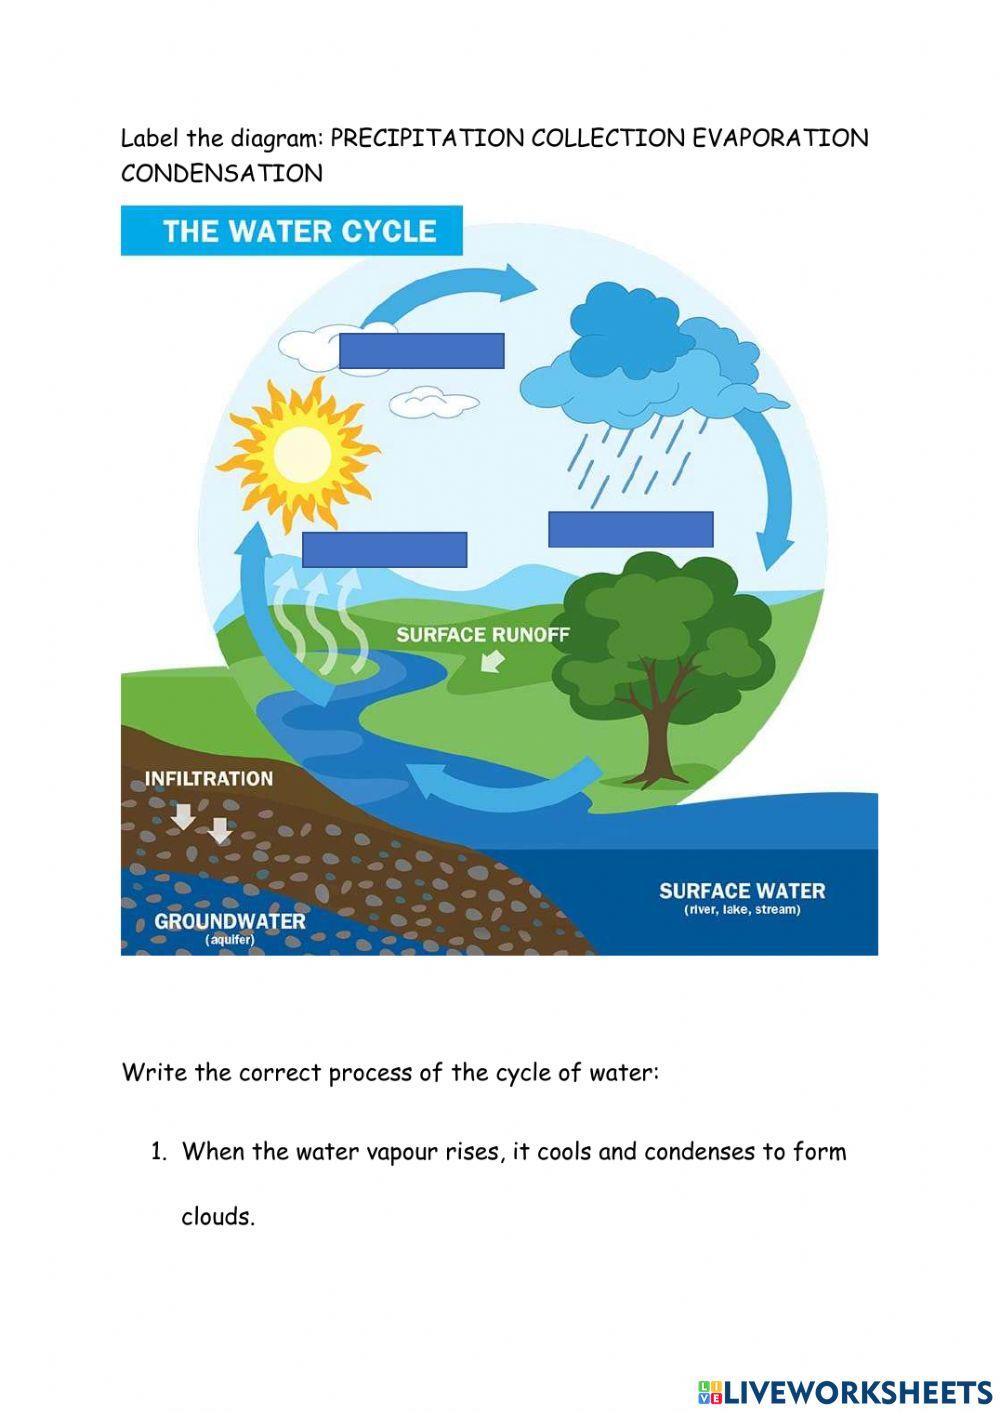 Cycle of water